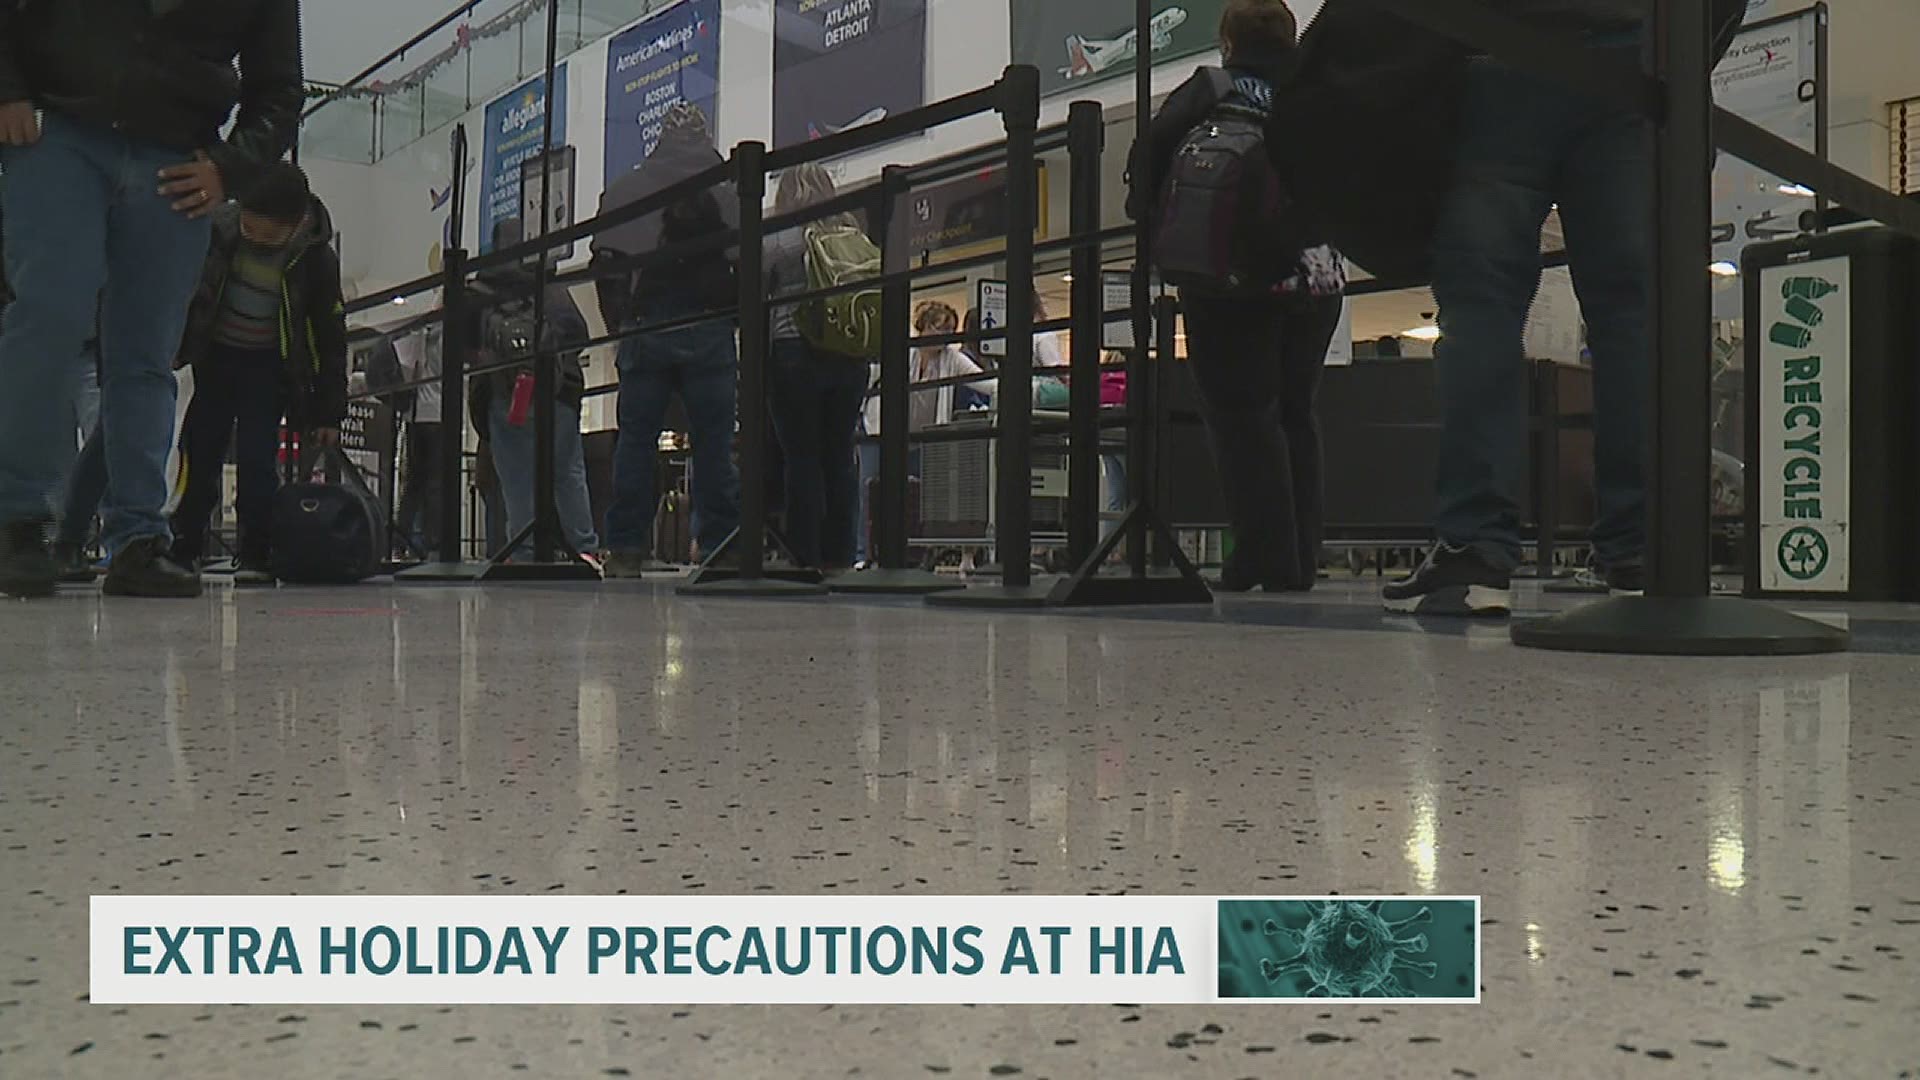 With the Coronavirus pandemic travel for the holidays looks different this year, how you can be sure you are traveling safely and what precautions are in place HIA